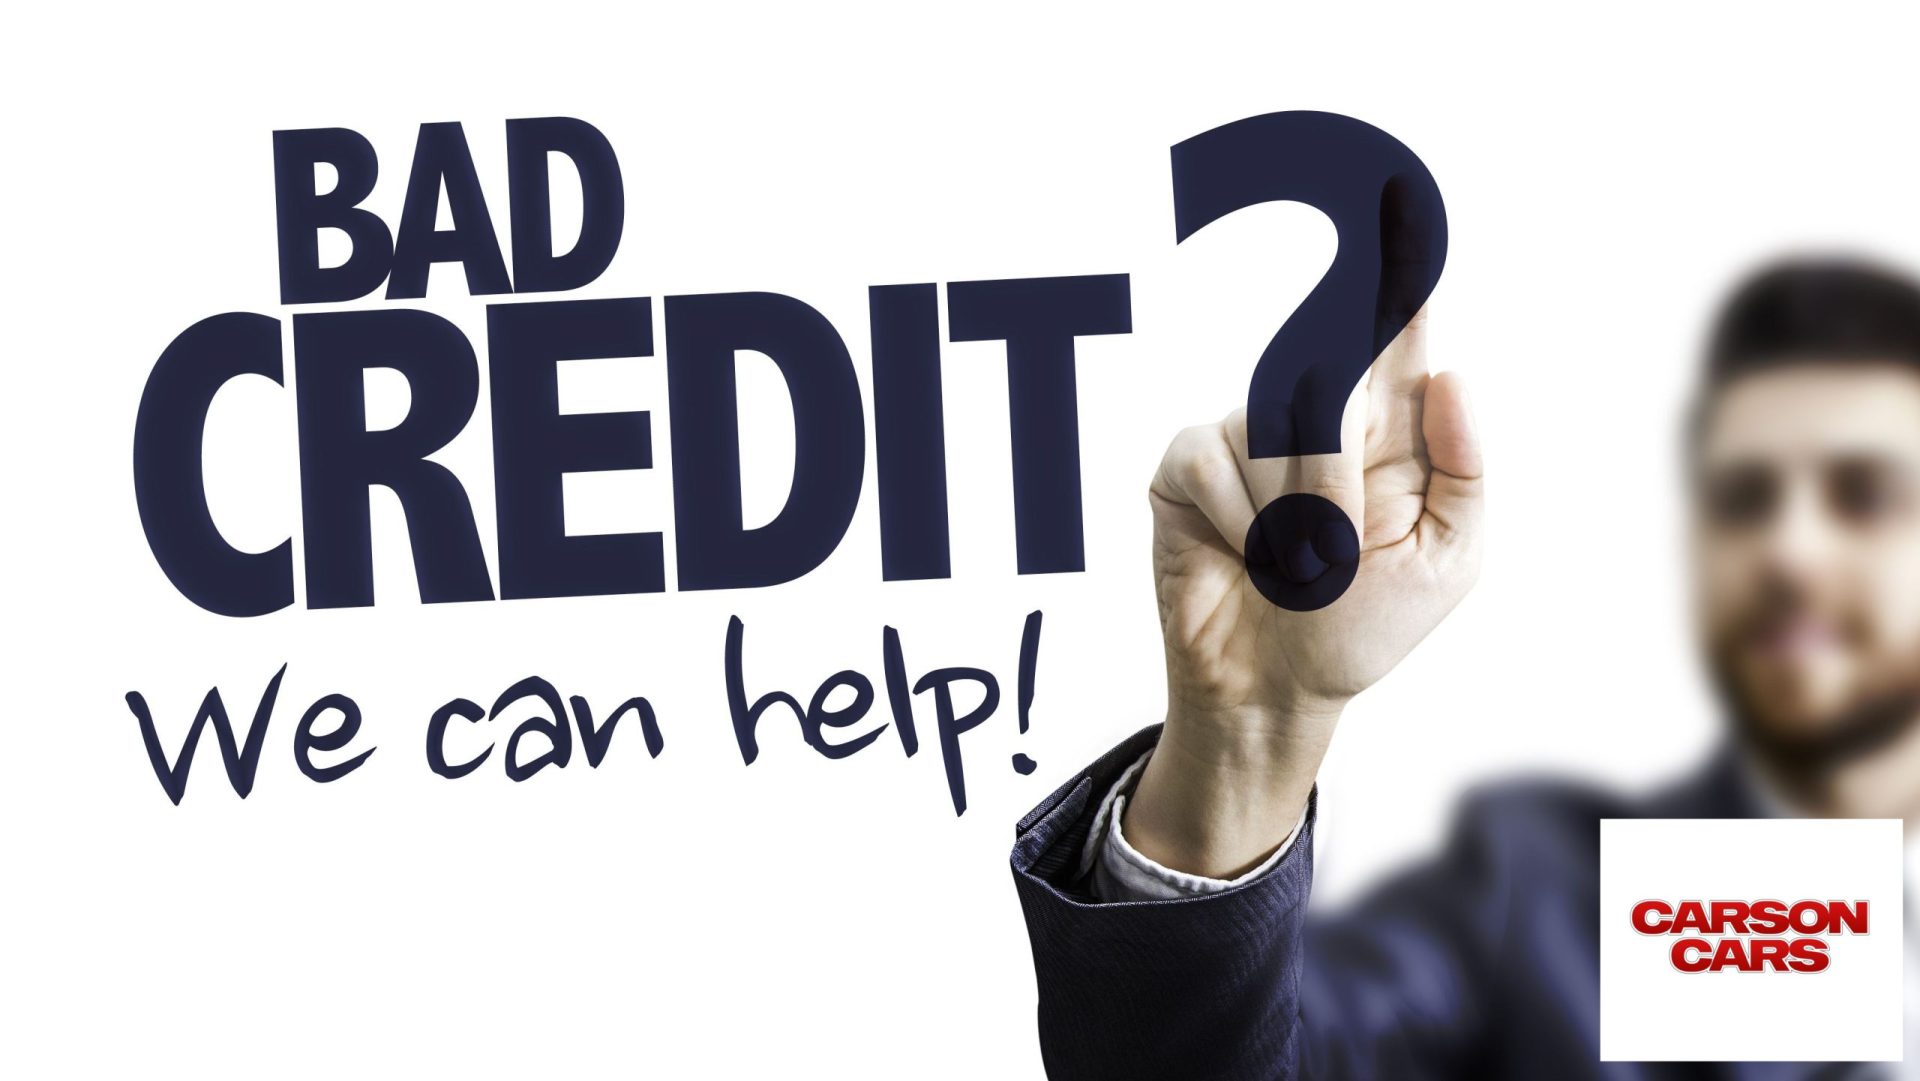 Bad Credit? Let Carson Cars Help You Boost Your Score with Affordable Auto Loans!